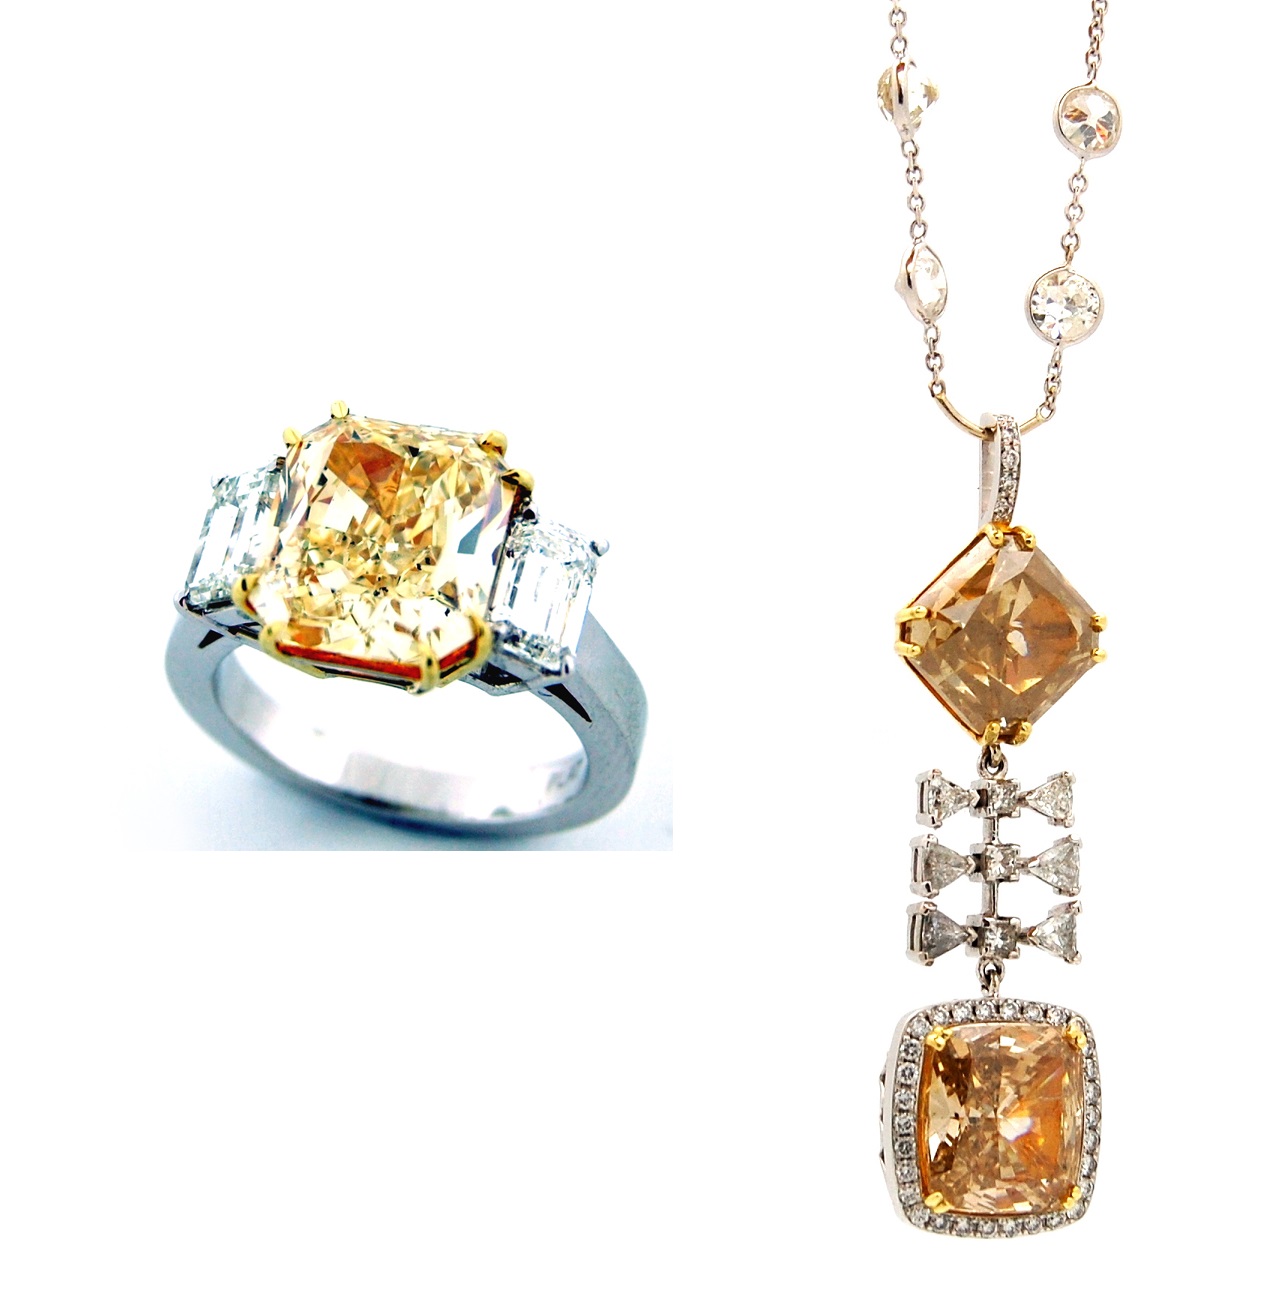 Lady’s Fancy Yellow Diamond Ring & Mixed Fancy Orangy Brown Yellow Pendant Set (24.68ct TW estimated)